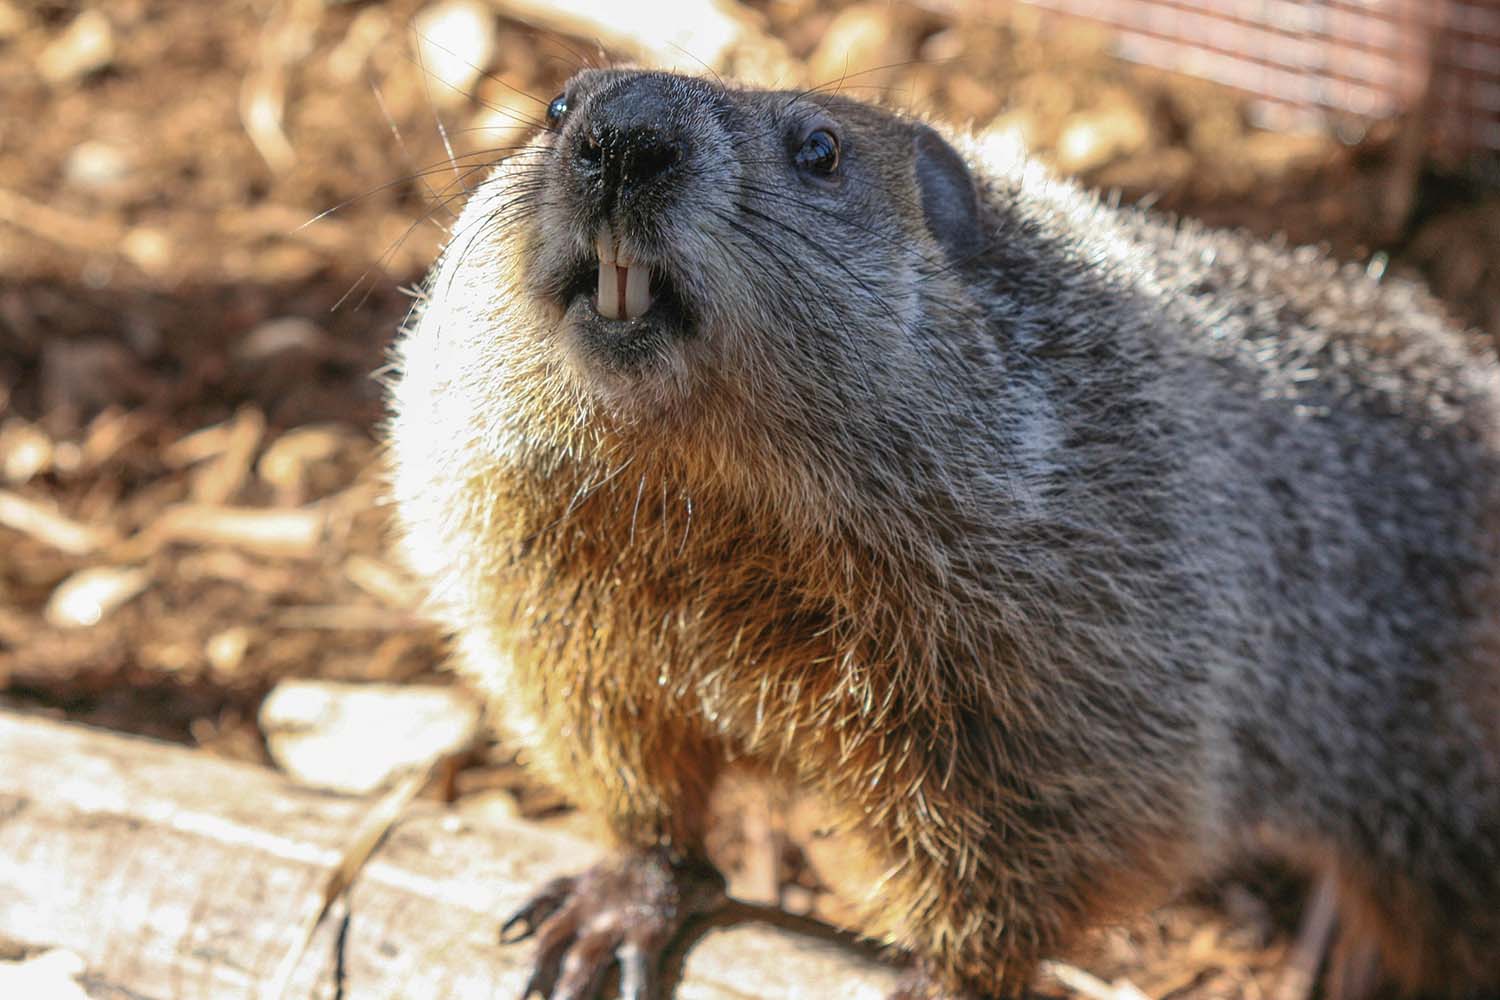 Real life for a hometown groundhog